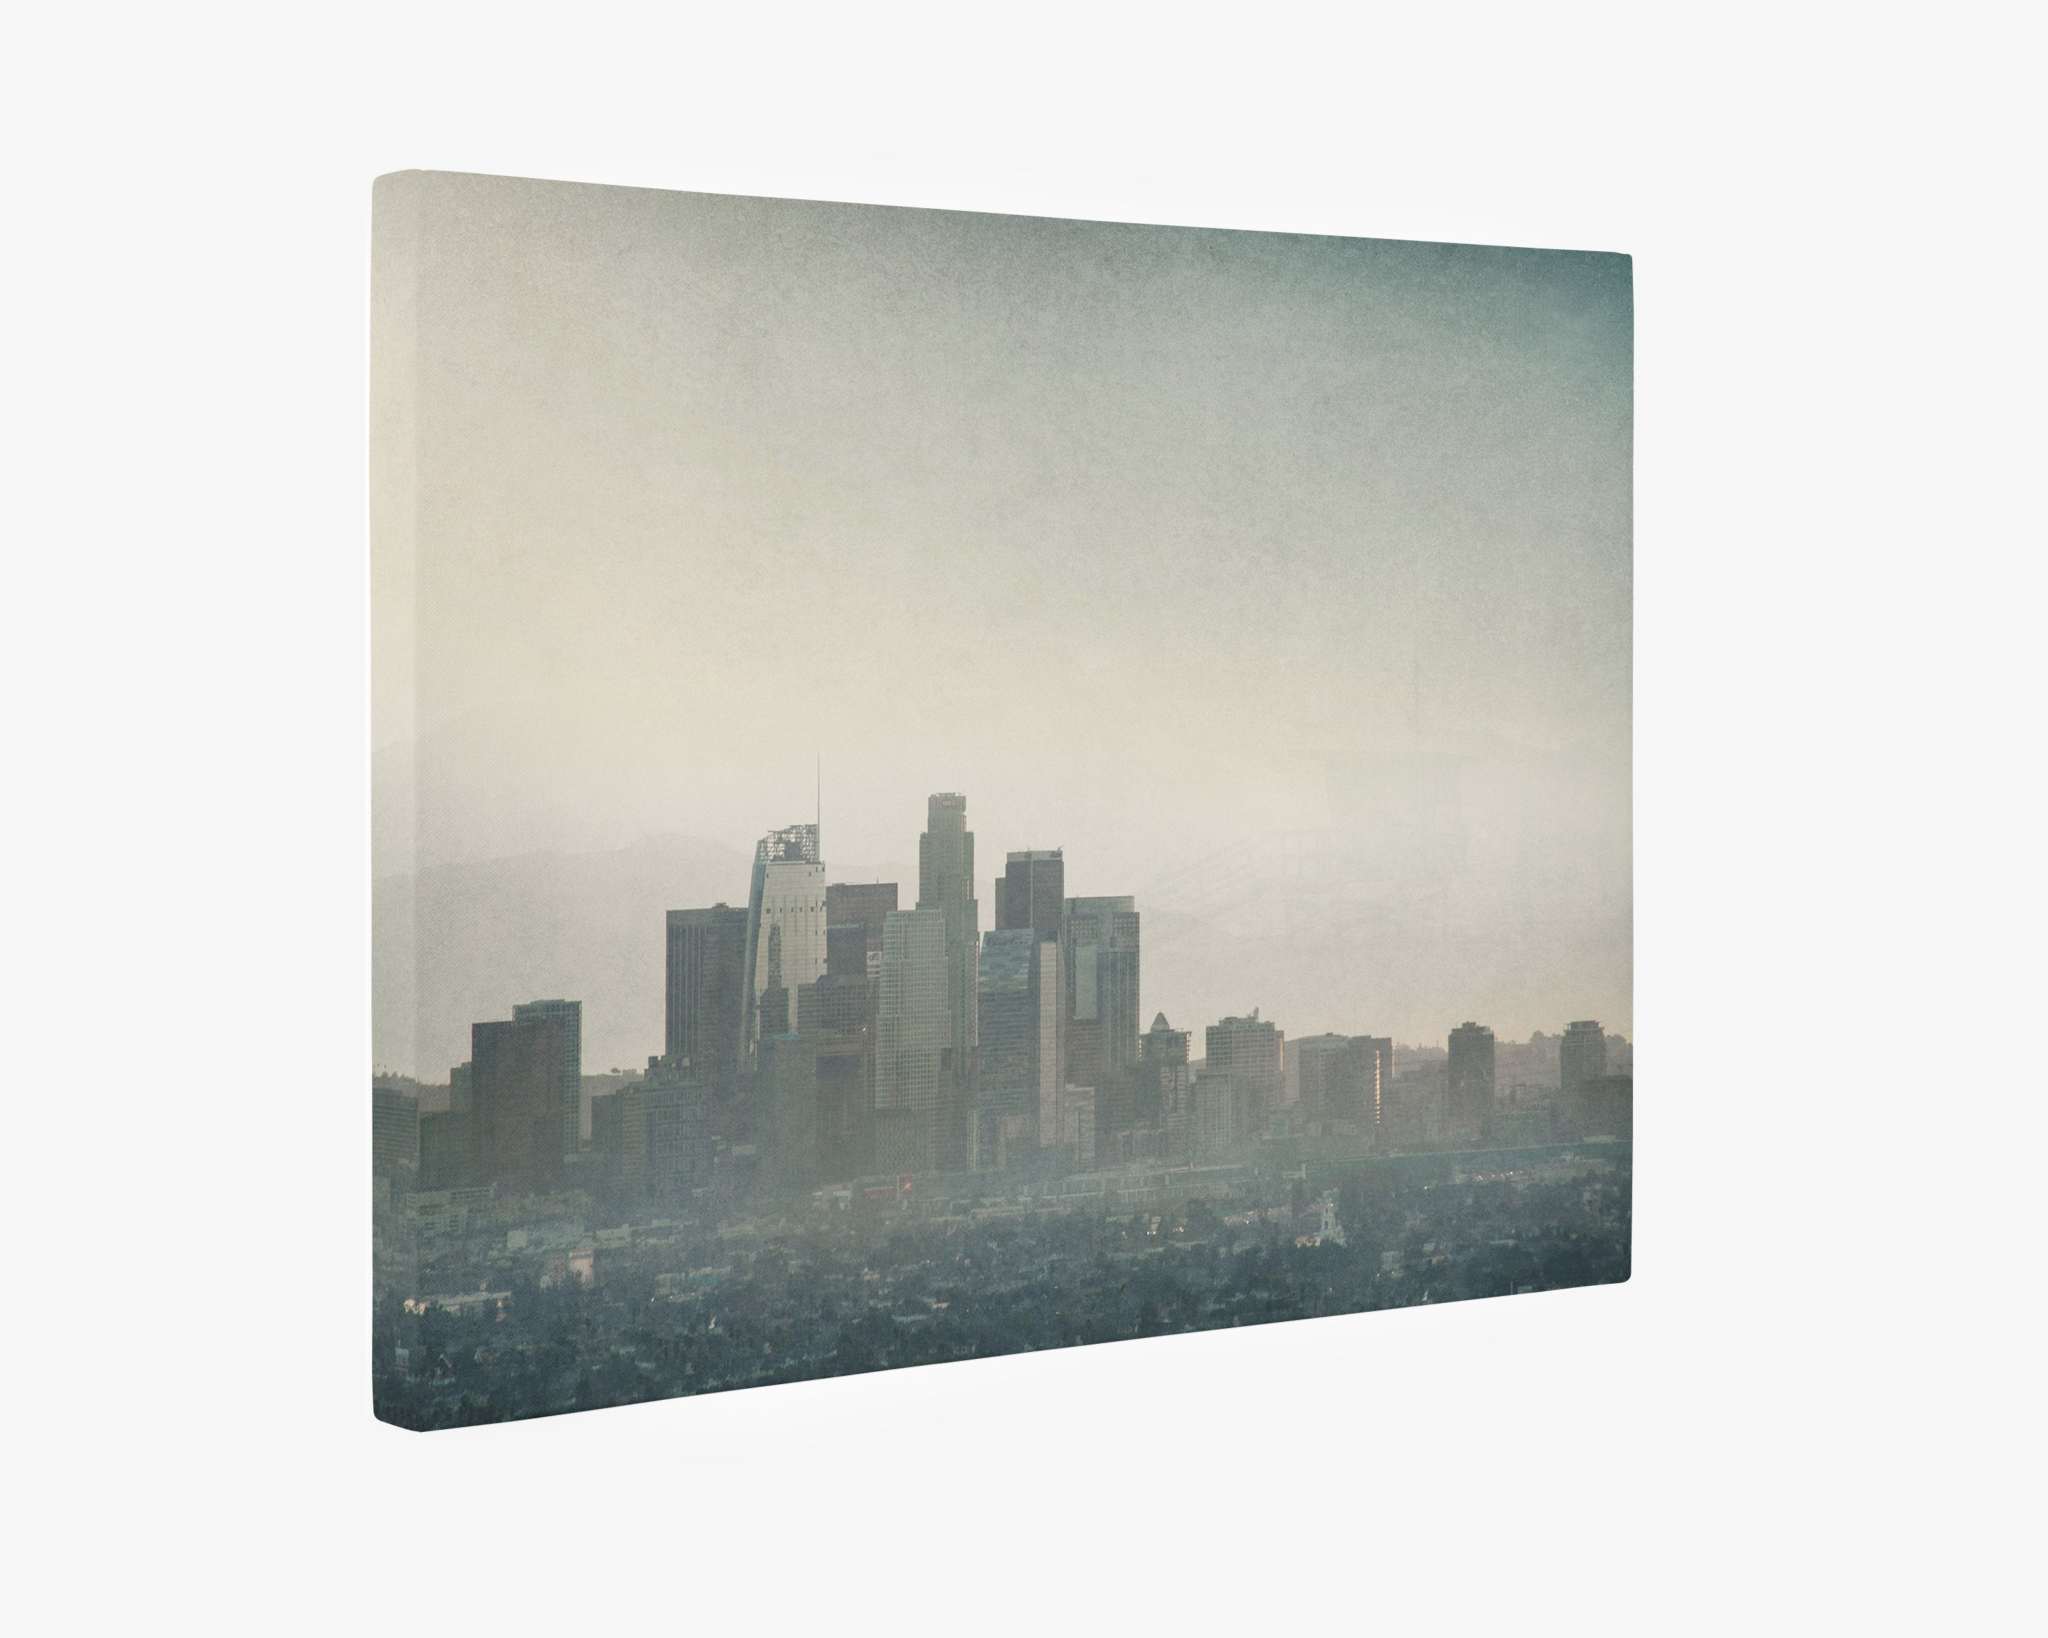 A Downtown Los Angeles Canvas Wall Art, 'Stormy La La Land' by Offley Green depicting a moody downtown Los Angeles scene with tall buildings and skyscrapers partially shrouded in mist against a grayish sky. The overall tone is muted and serene, evoking a sense of calm and stillness in the urban environment. Printed on premium artist-grade canvas for lasting elegance.